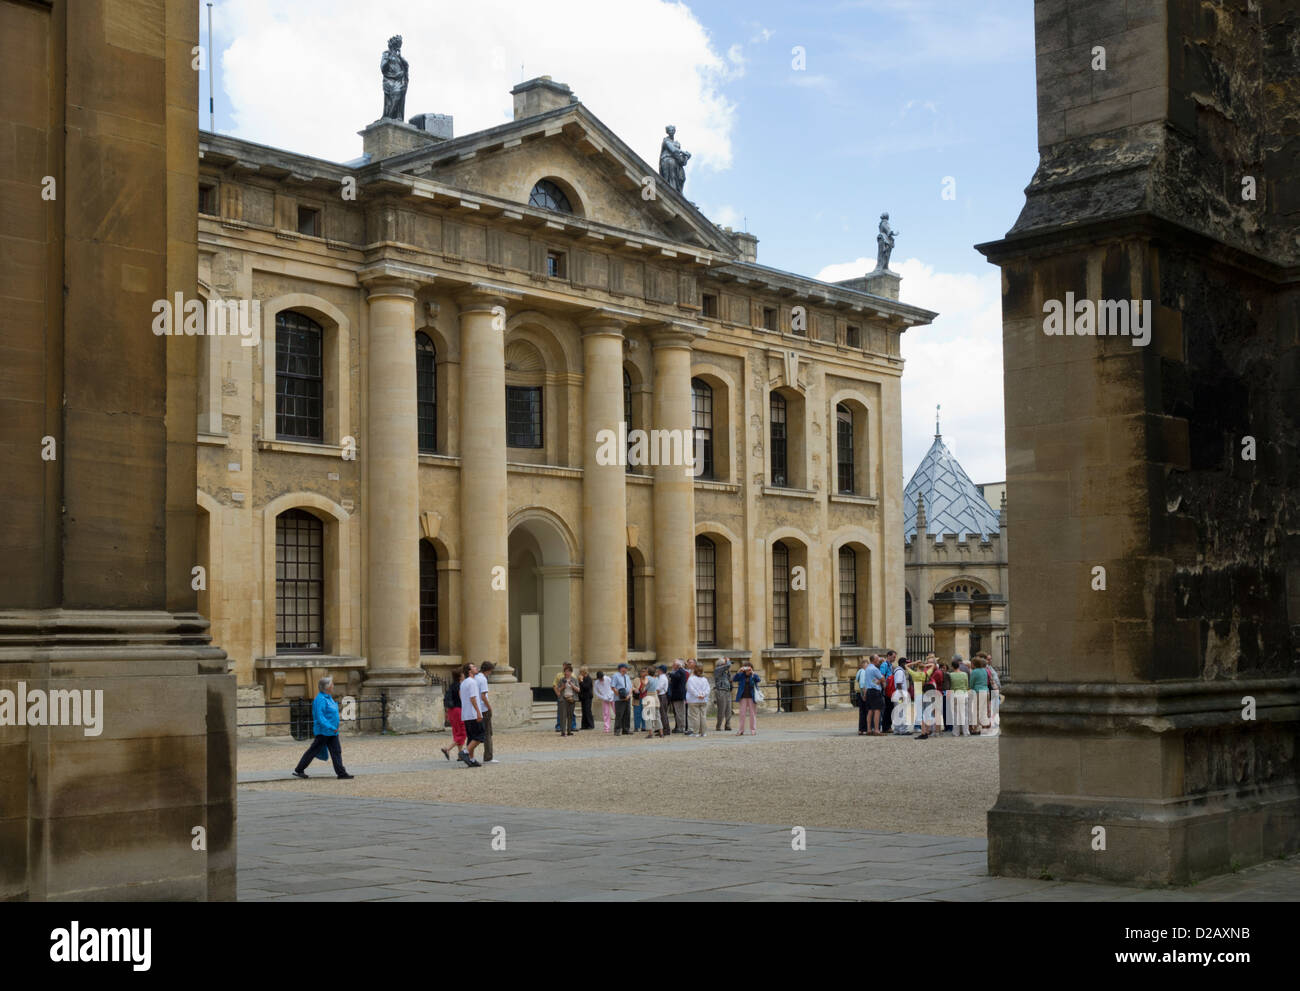 A group of tourists listening to their tour leader in front of the Clarendon Building, Oxford, Oxfordshire, England, UK Stock Photo